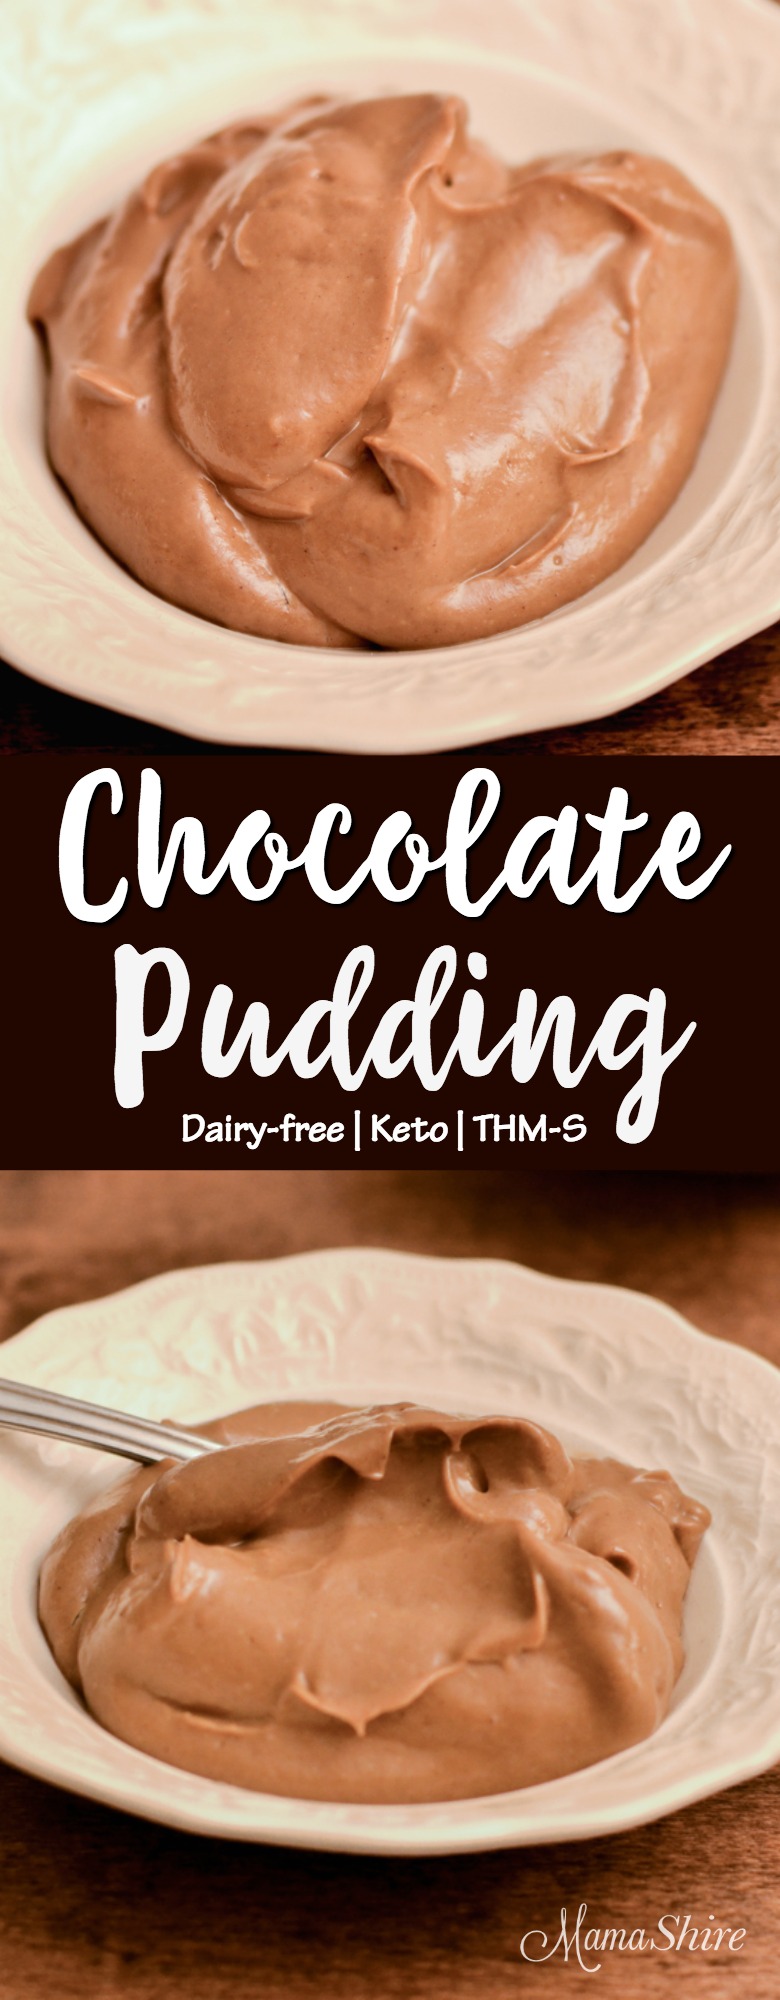 Dairy-free creamy chocolate pudding that is on plan with Trim Healthy Mama and Keto